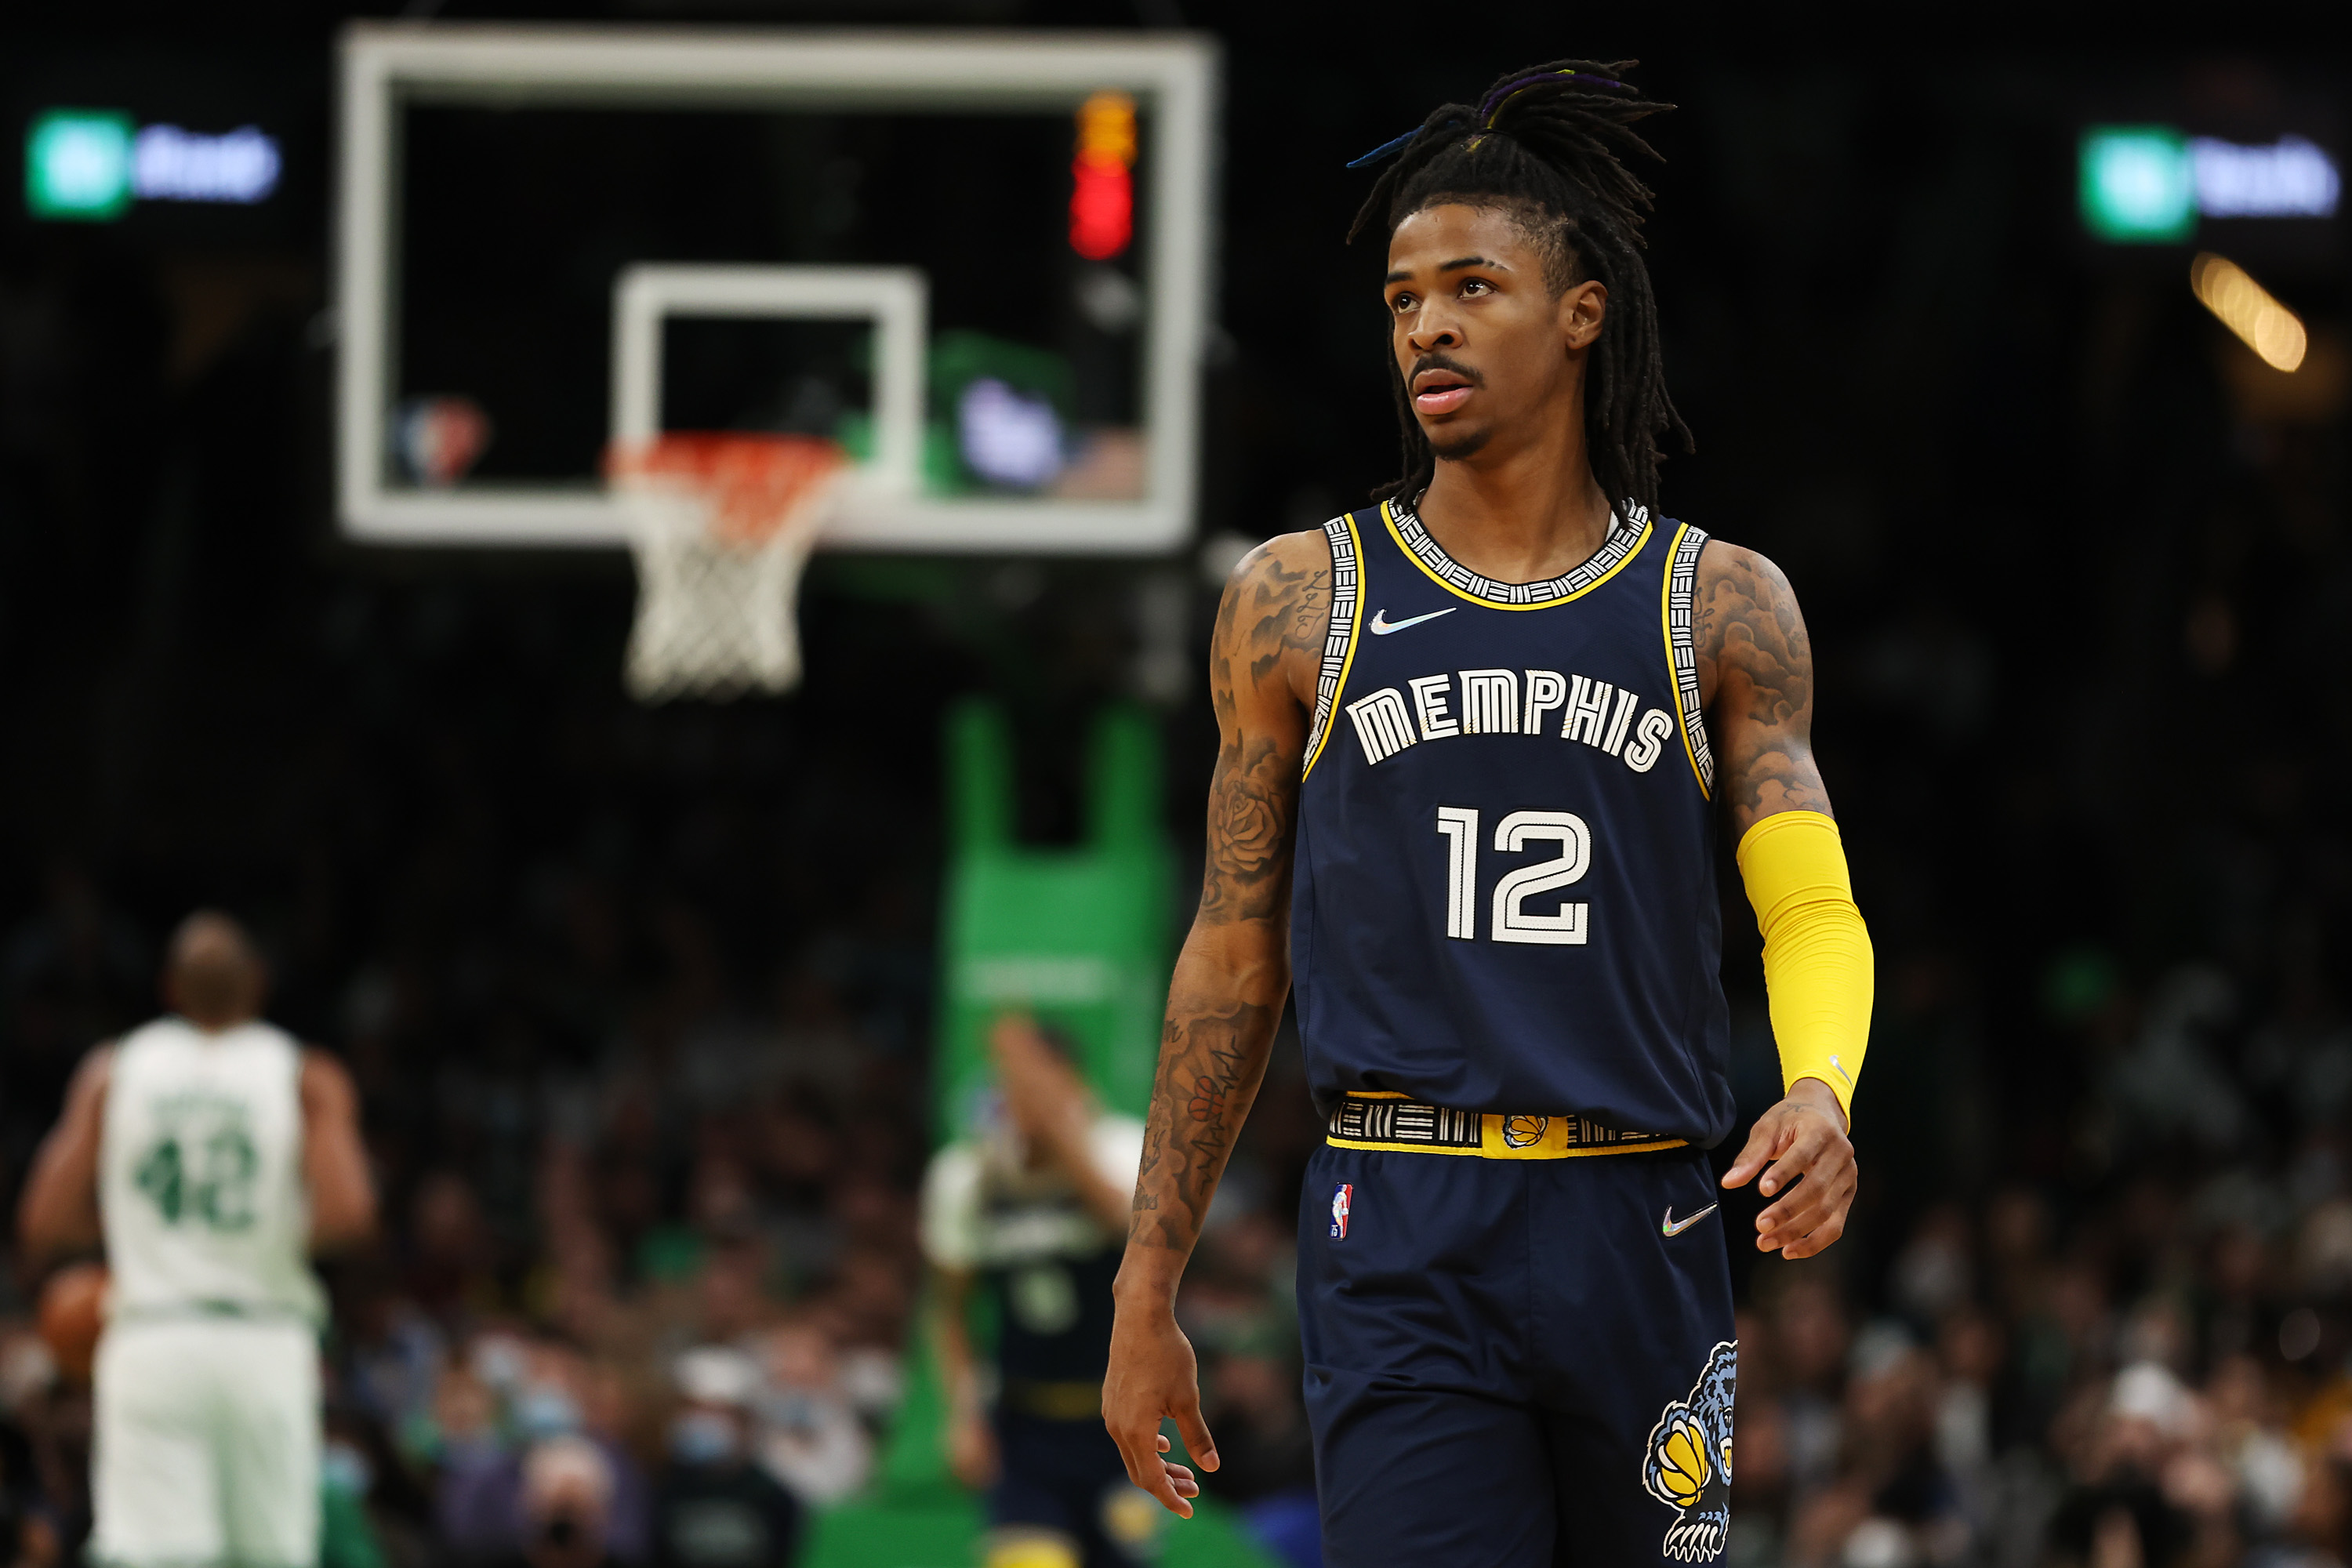 Watch: Memphis' Ja Morant delivers an eye-popping dunk in the first half of  Thursday's game against the Celtics - The Boston Globe